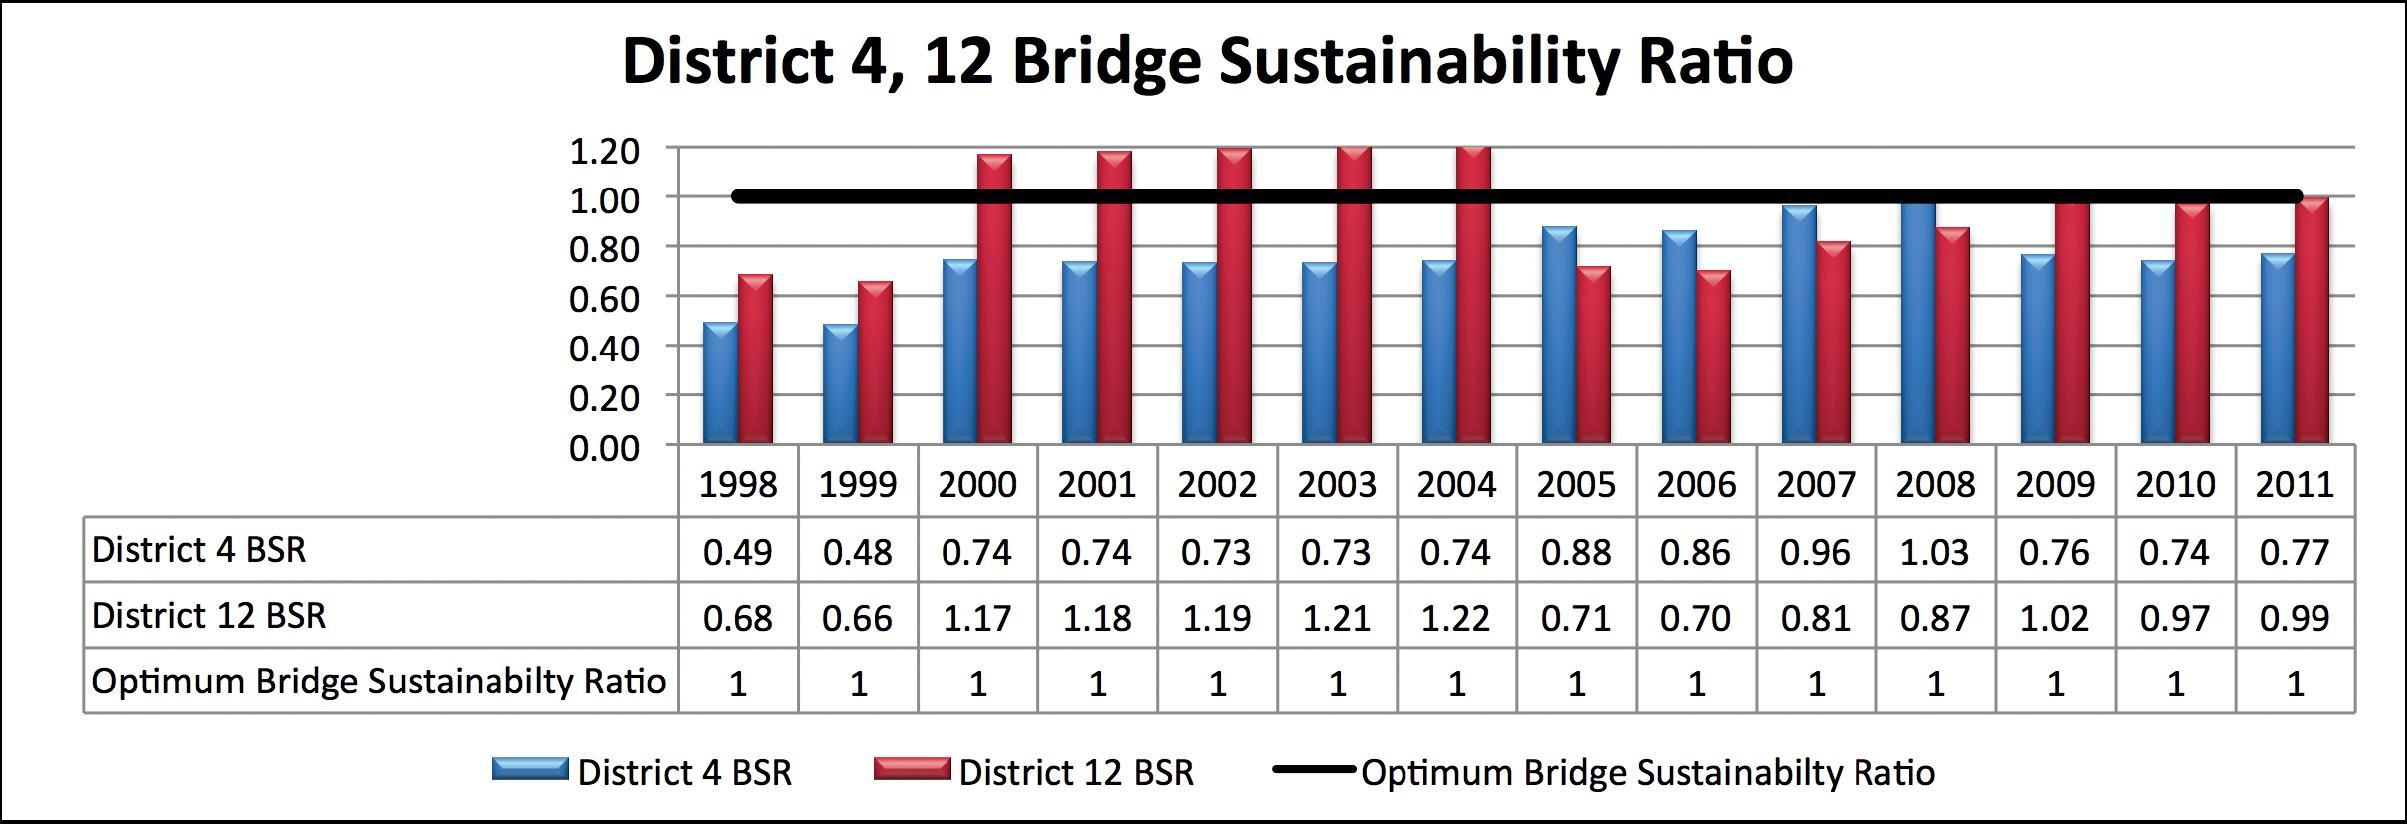 Figure 39 illustrates the bridge sustainability ratios for districts 4 and 12 between 1998 and 2011. The bridge sustainability ratio for district 4 in 1998 was at point 49, and steadily rose to point 77 in 2011.  At the same time, district 12's bridge sustainability ratio rose from point 68 in 1998 to above zero from 2000 through 2004 before reaching point 99 percent in 2001.  Corresponding series in the chart illustrate that as the sustainability ratios rose over time, the districts consistently came closer to meeting or exceeding the bridge condition targets.